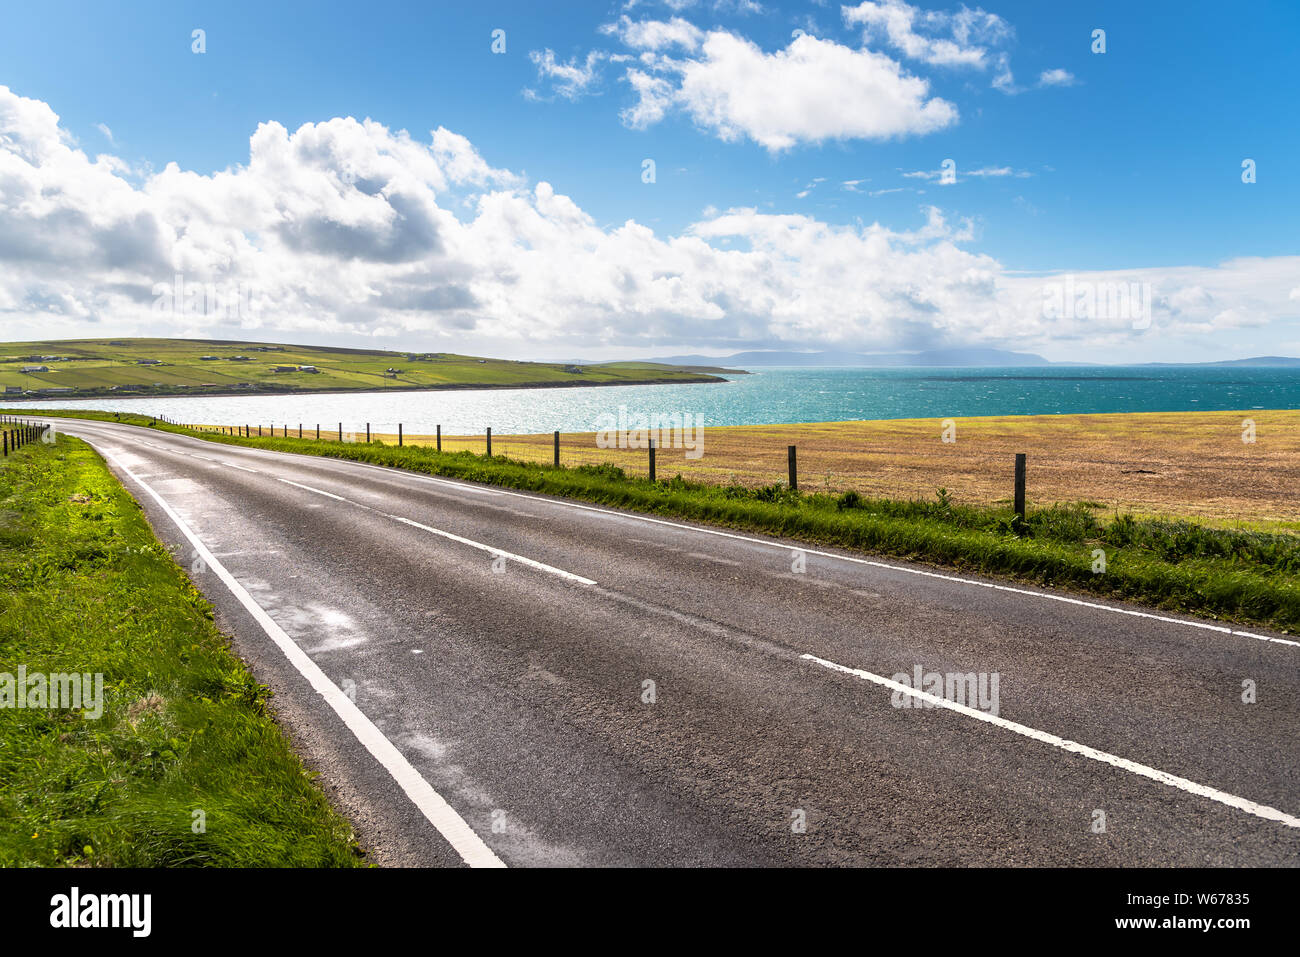 Deserted road running along a beautiful bay on a sunny summer day. Stock Photo